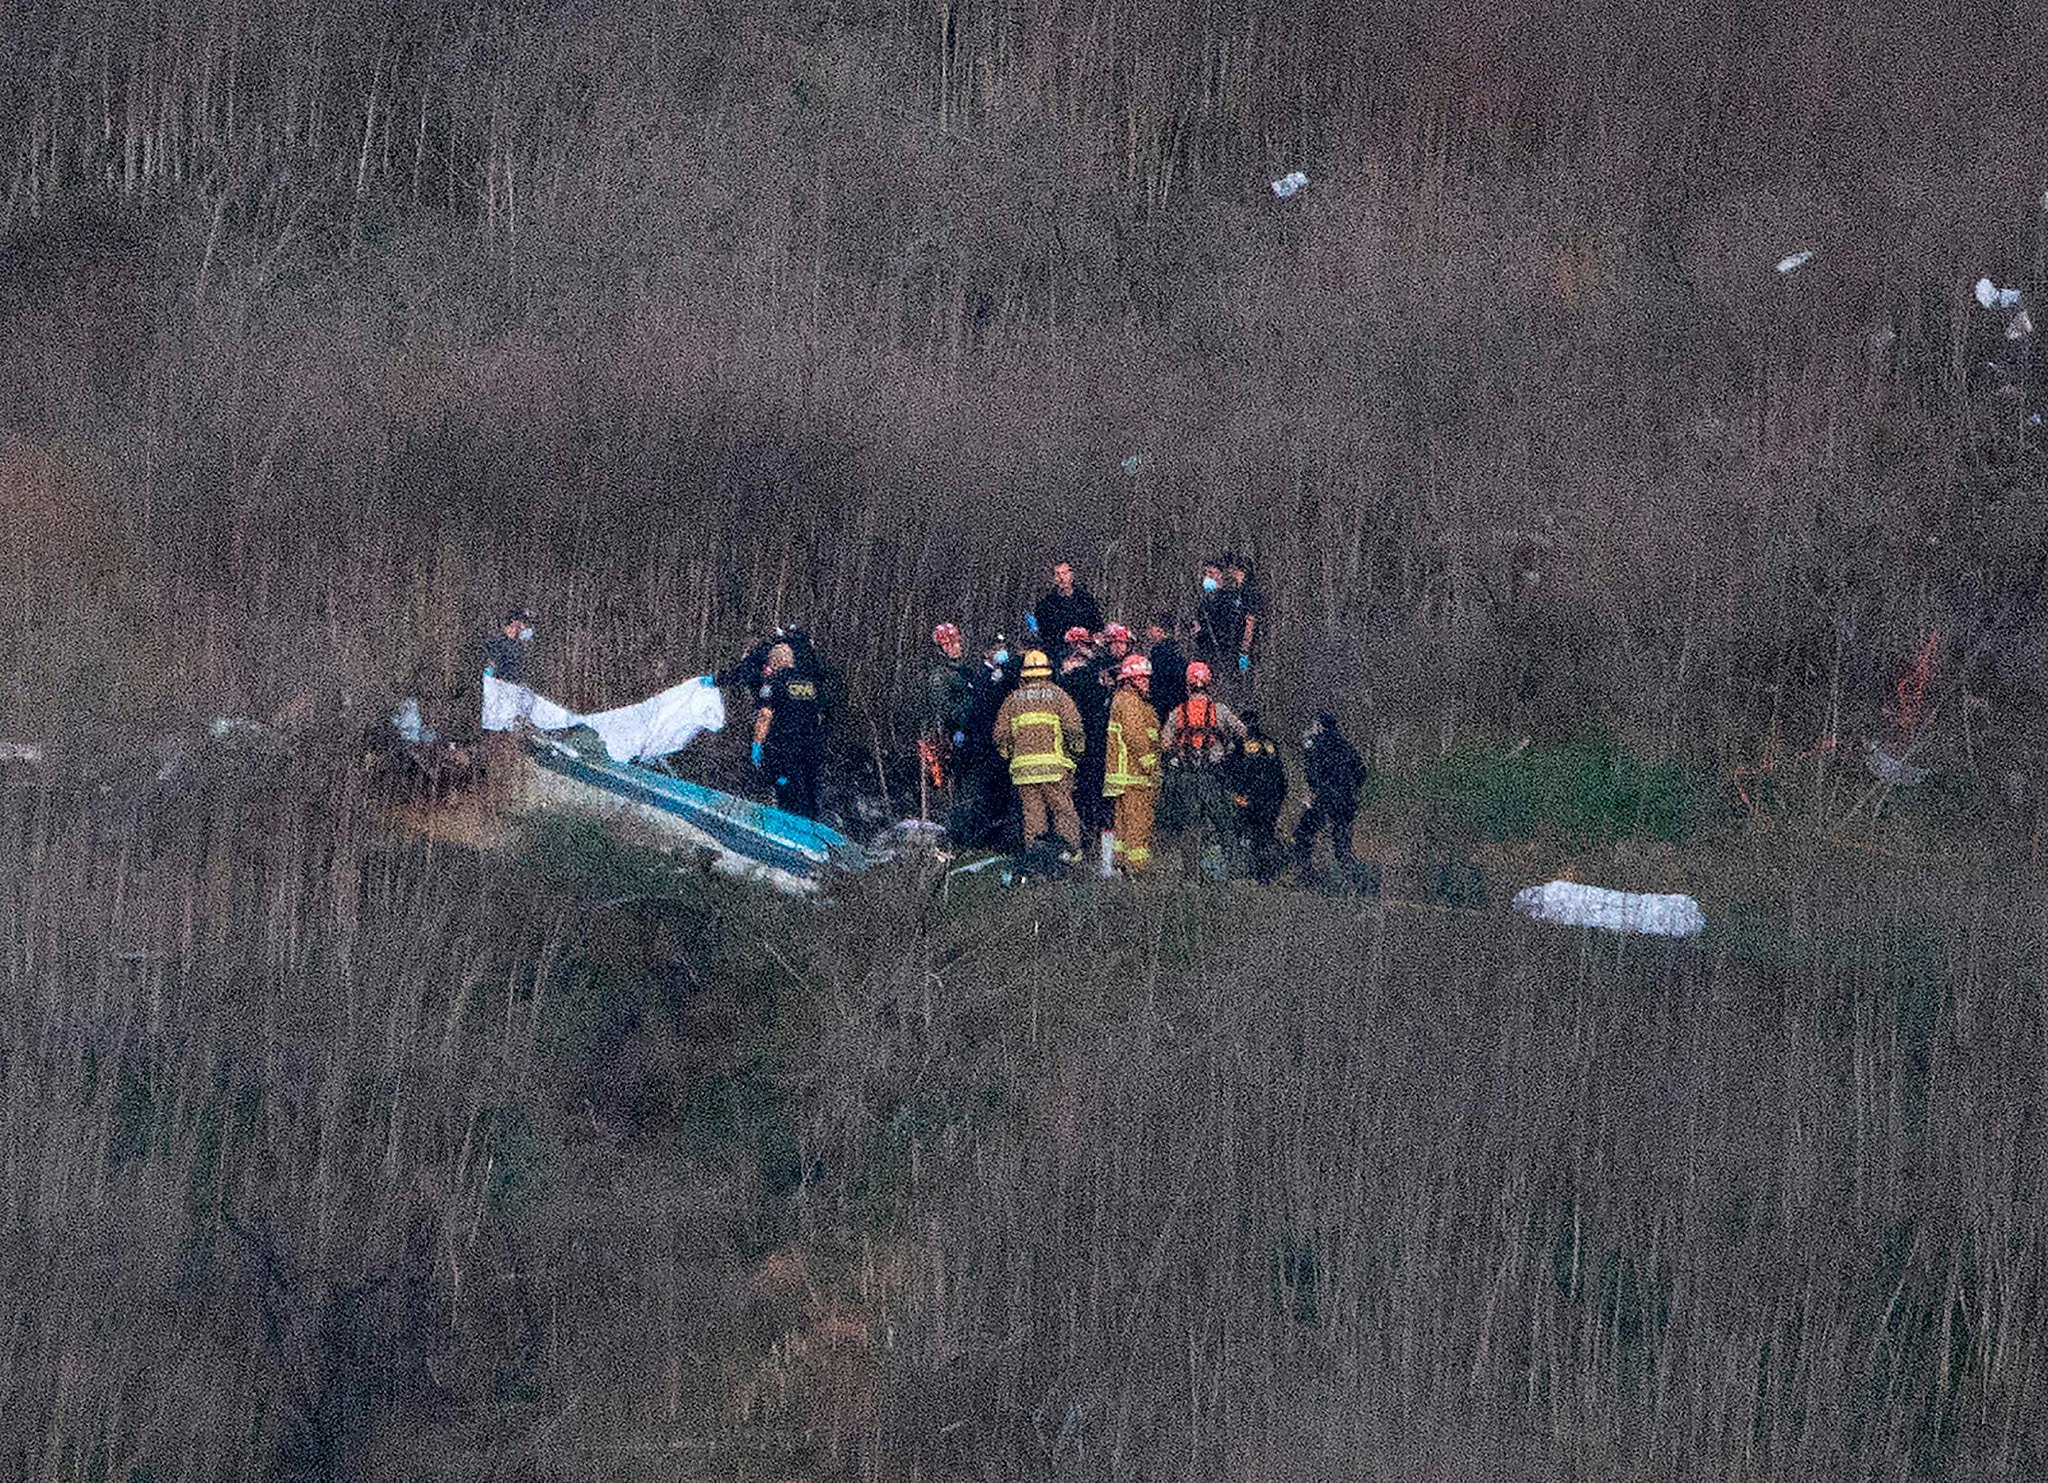 Kobe Bryant & Daughter Die in Helicopter Crash, 3 Bodies Recovered